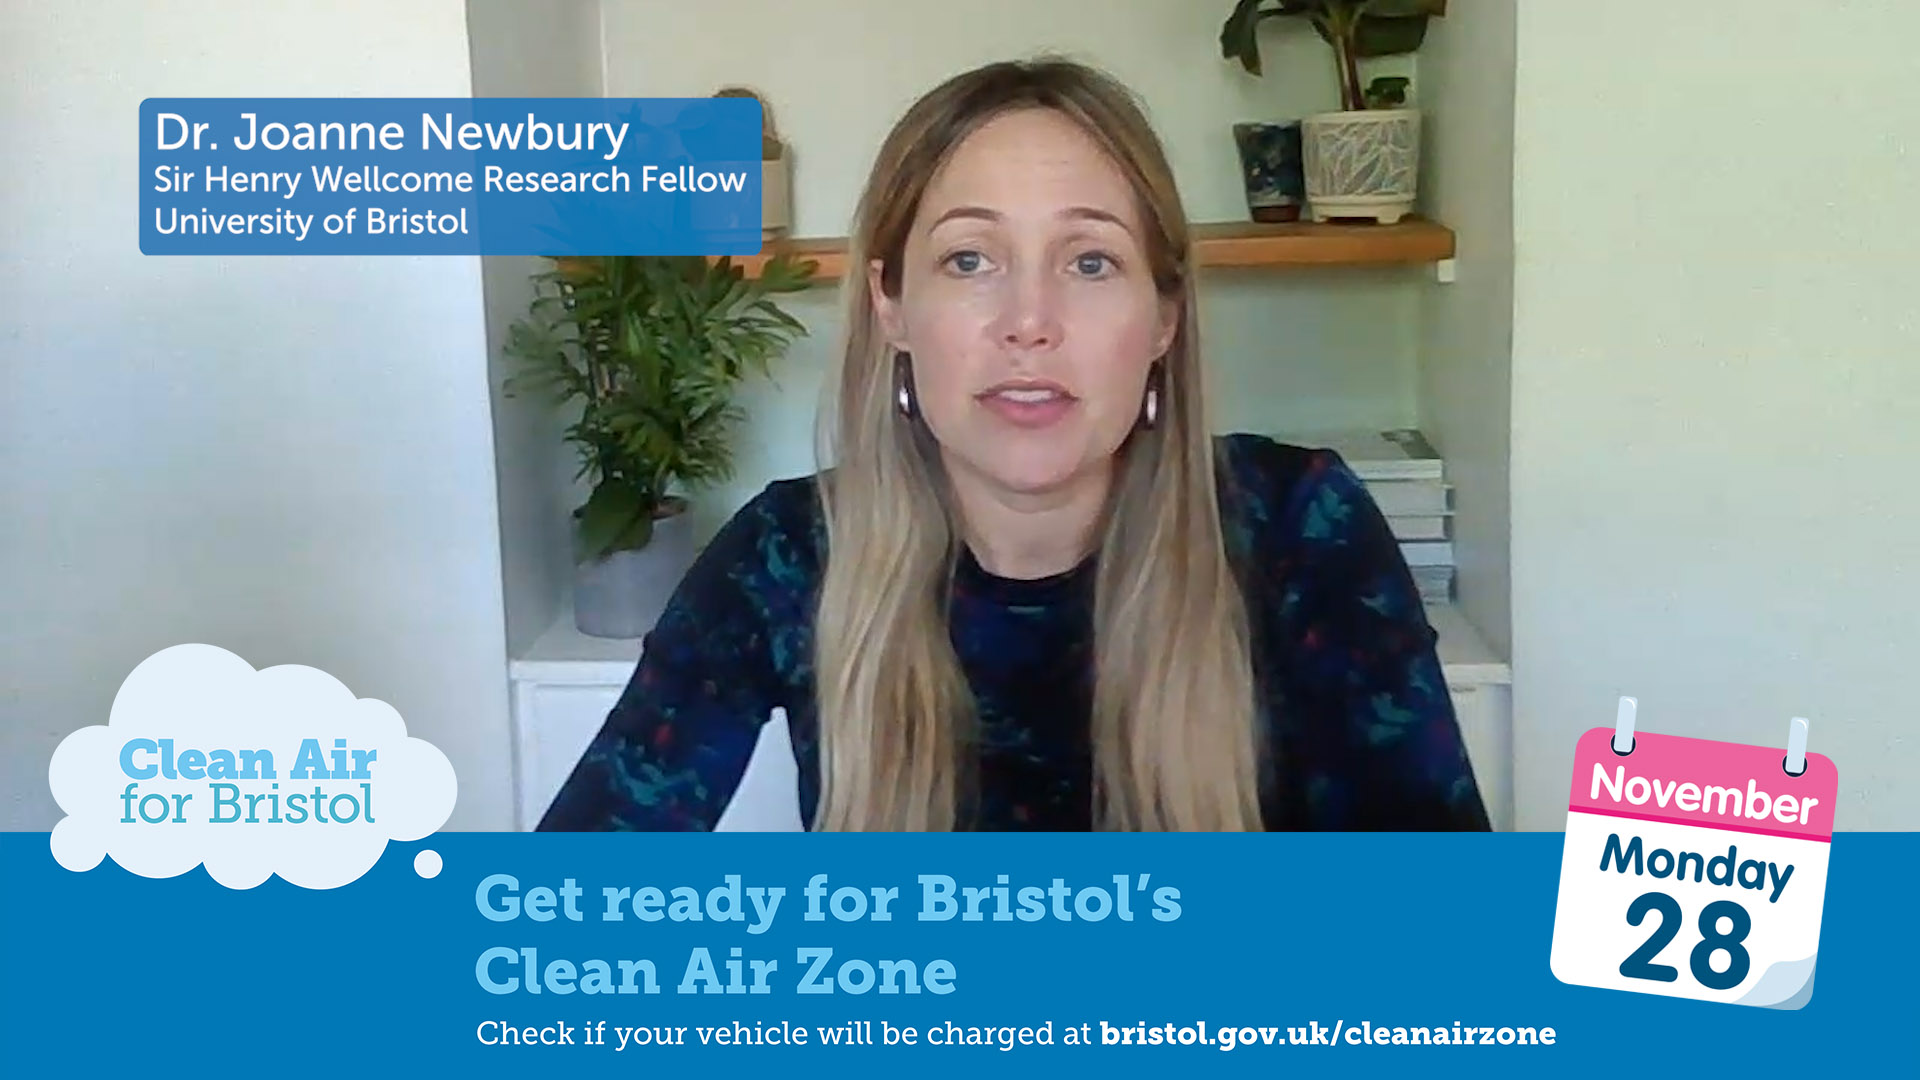 Landscape thumbnail showing Dr Joanne Newbury with title and border with 28 November shown as launch of Clean Air Zone